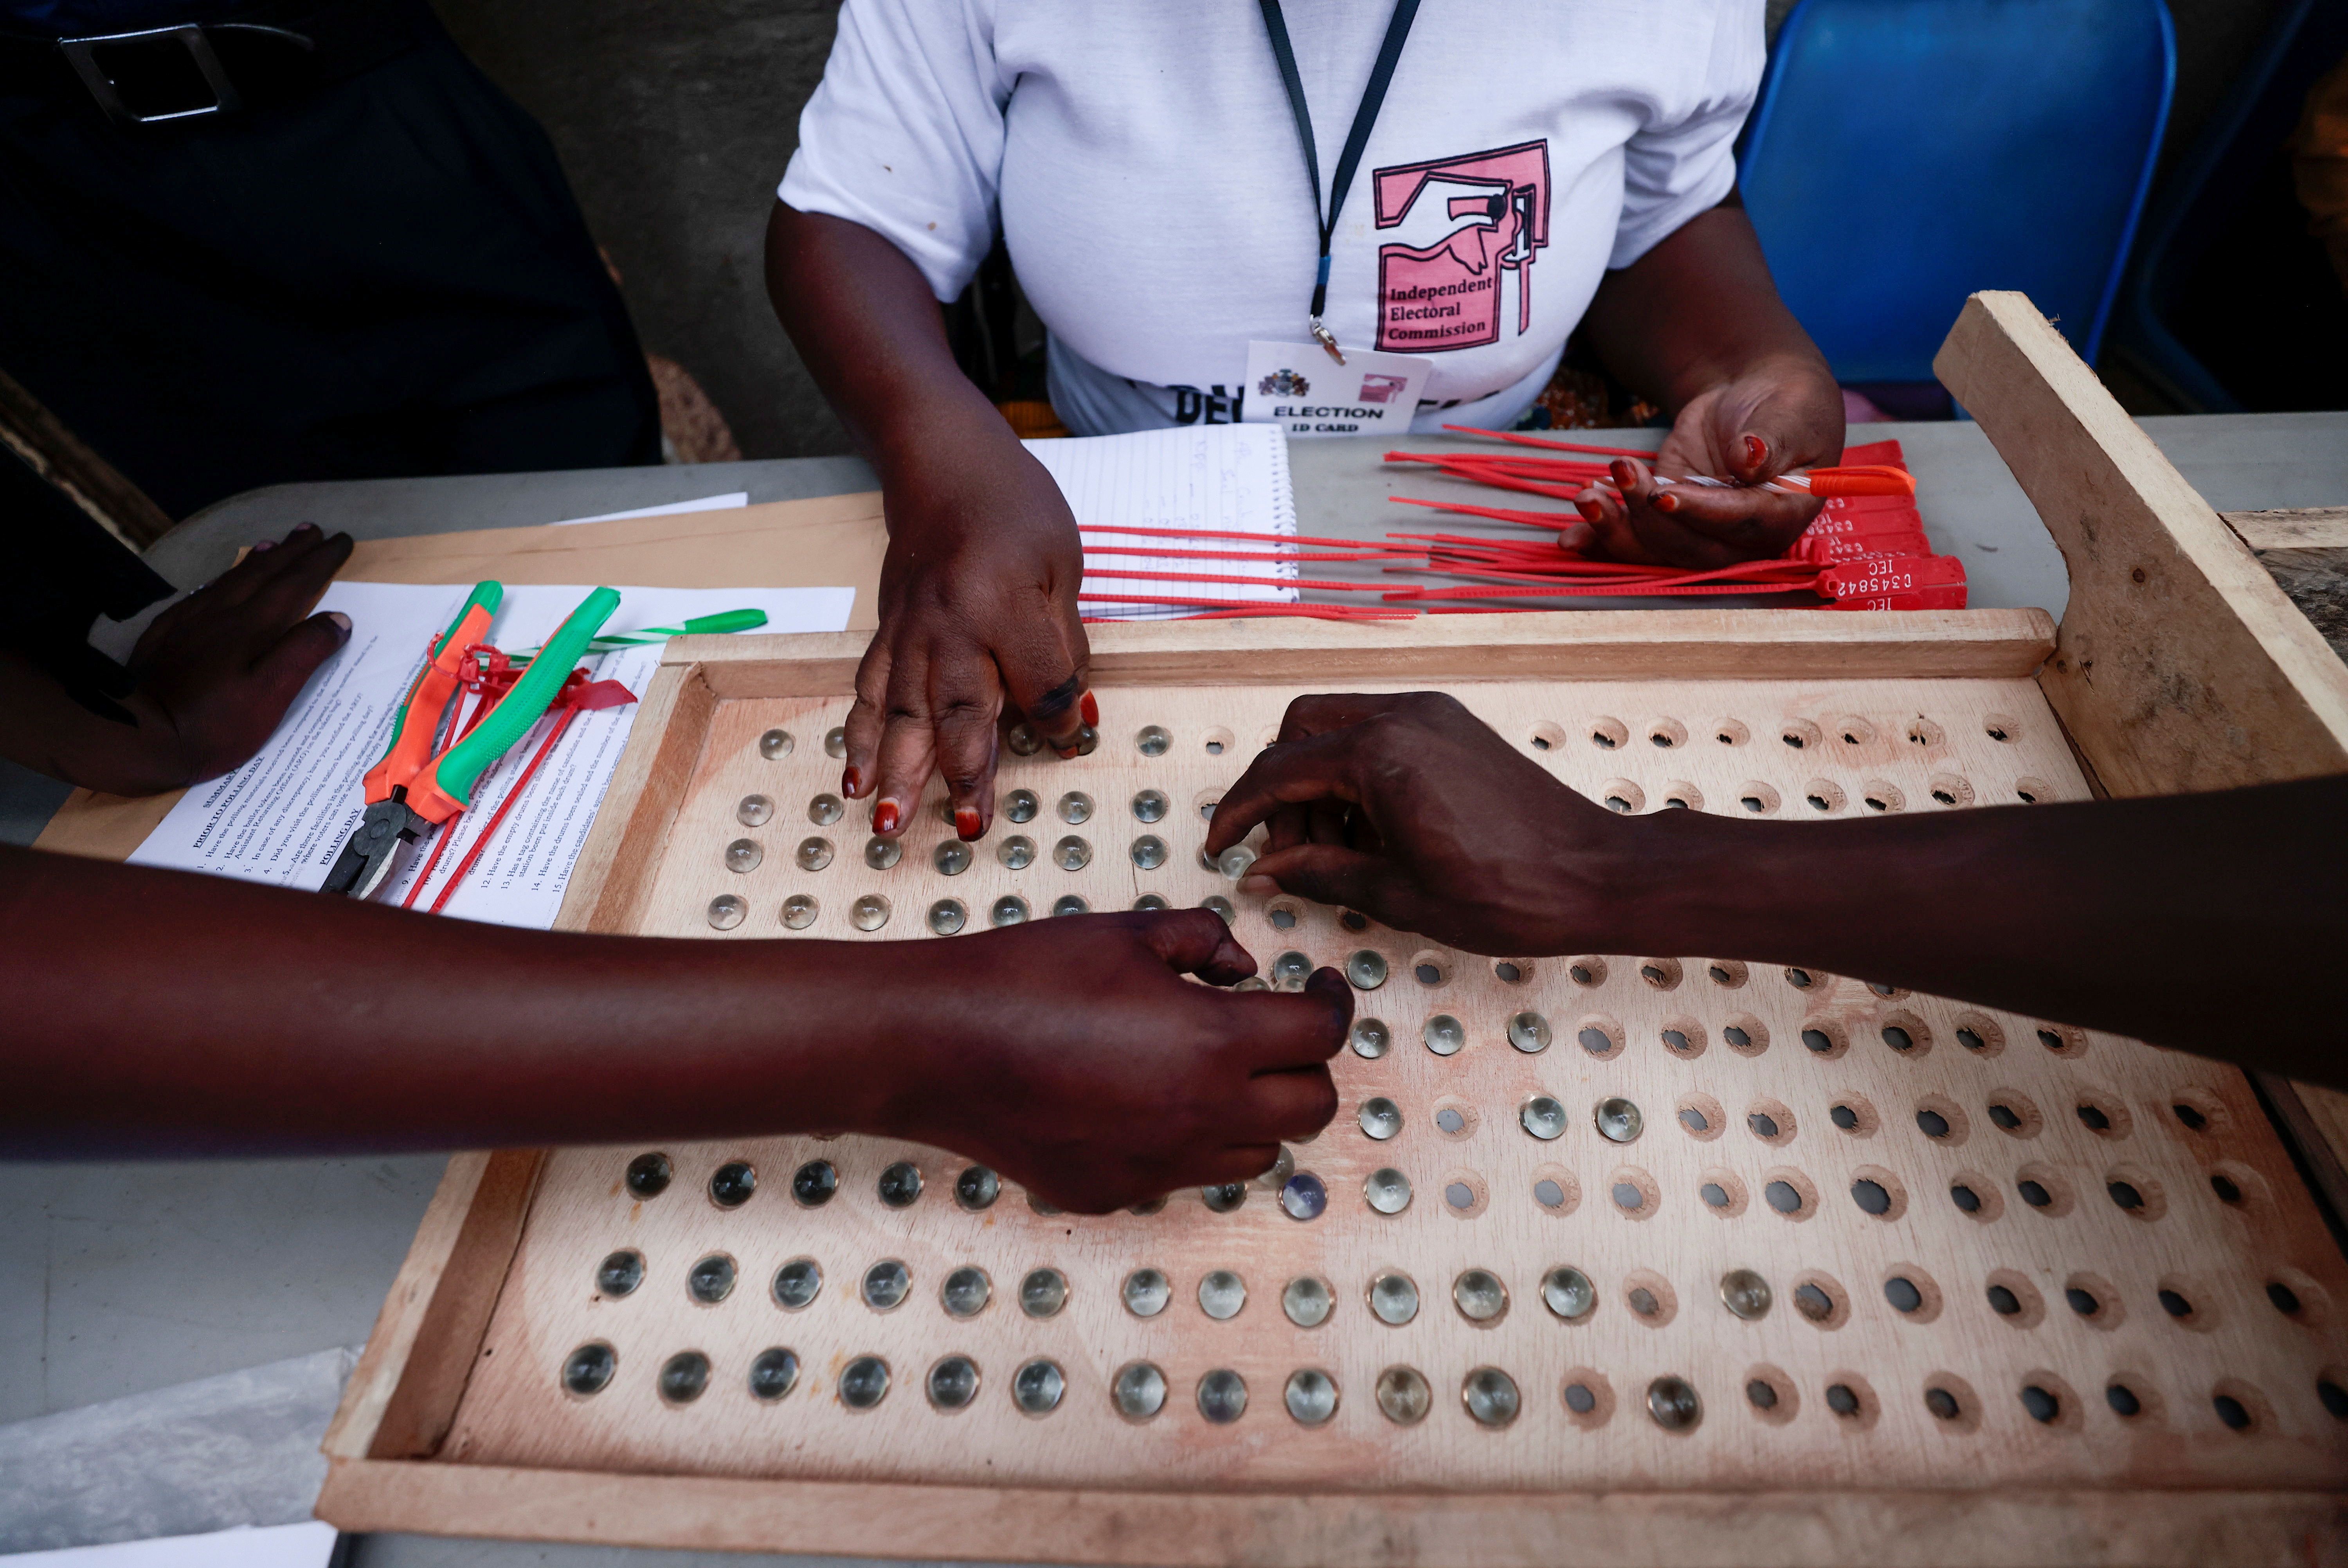 Gambian's polling station staff members count marbles that represent votes during the presidential election, in Banjul, Gambia December 4, 2021. REUTERS/Zohra Bensemra